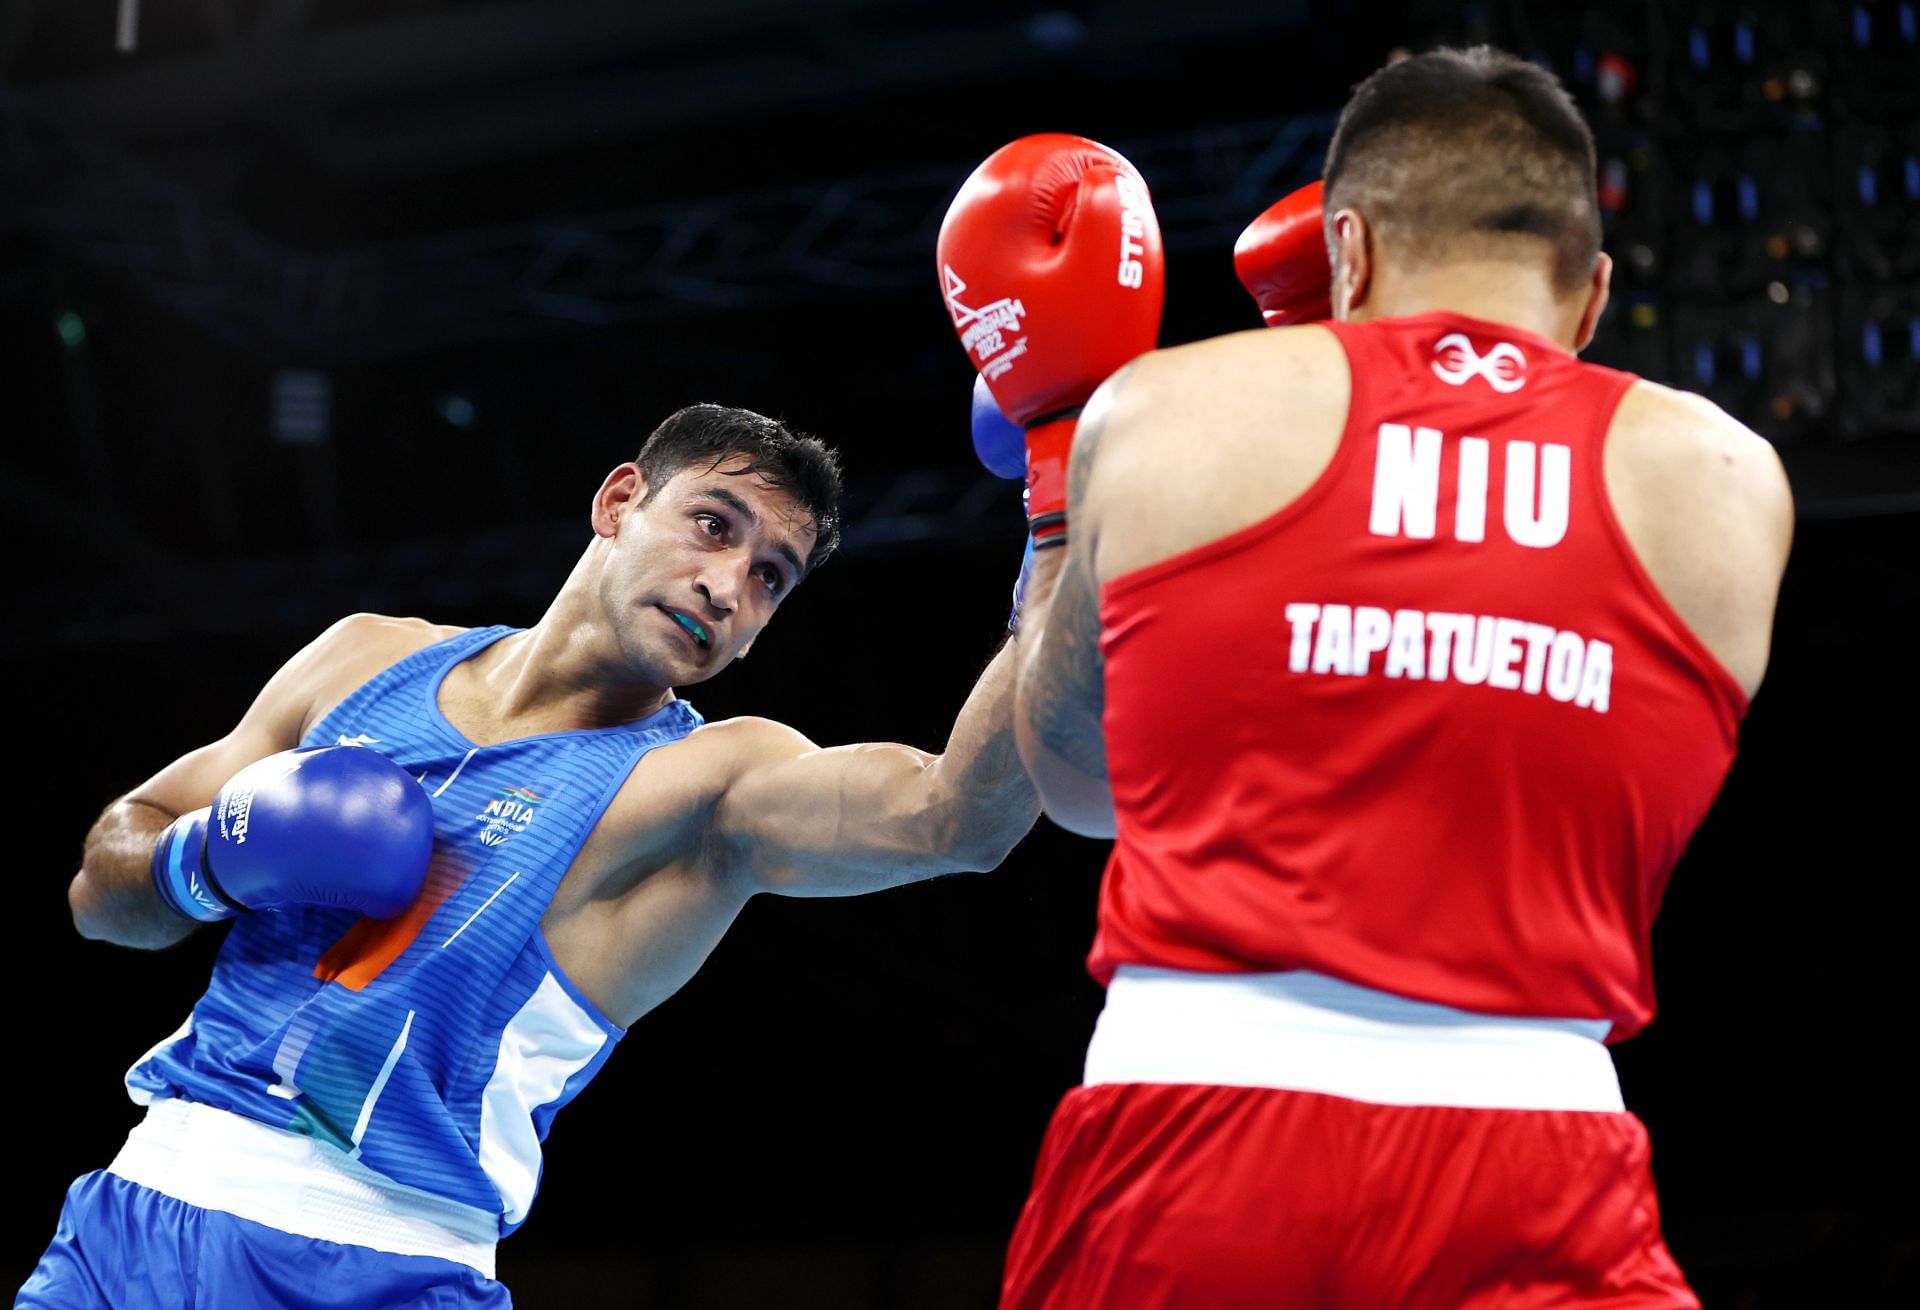 Boxing - Commonwealth Games: Day 4 Ashish Kumar Chaudhary in action